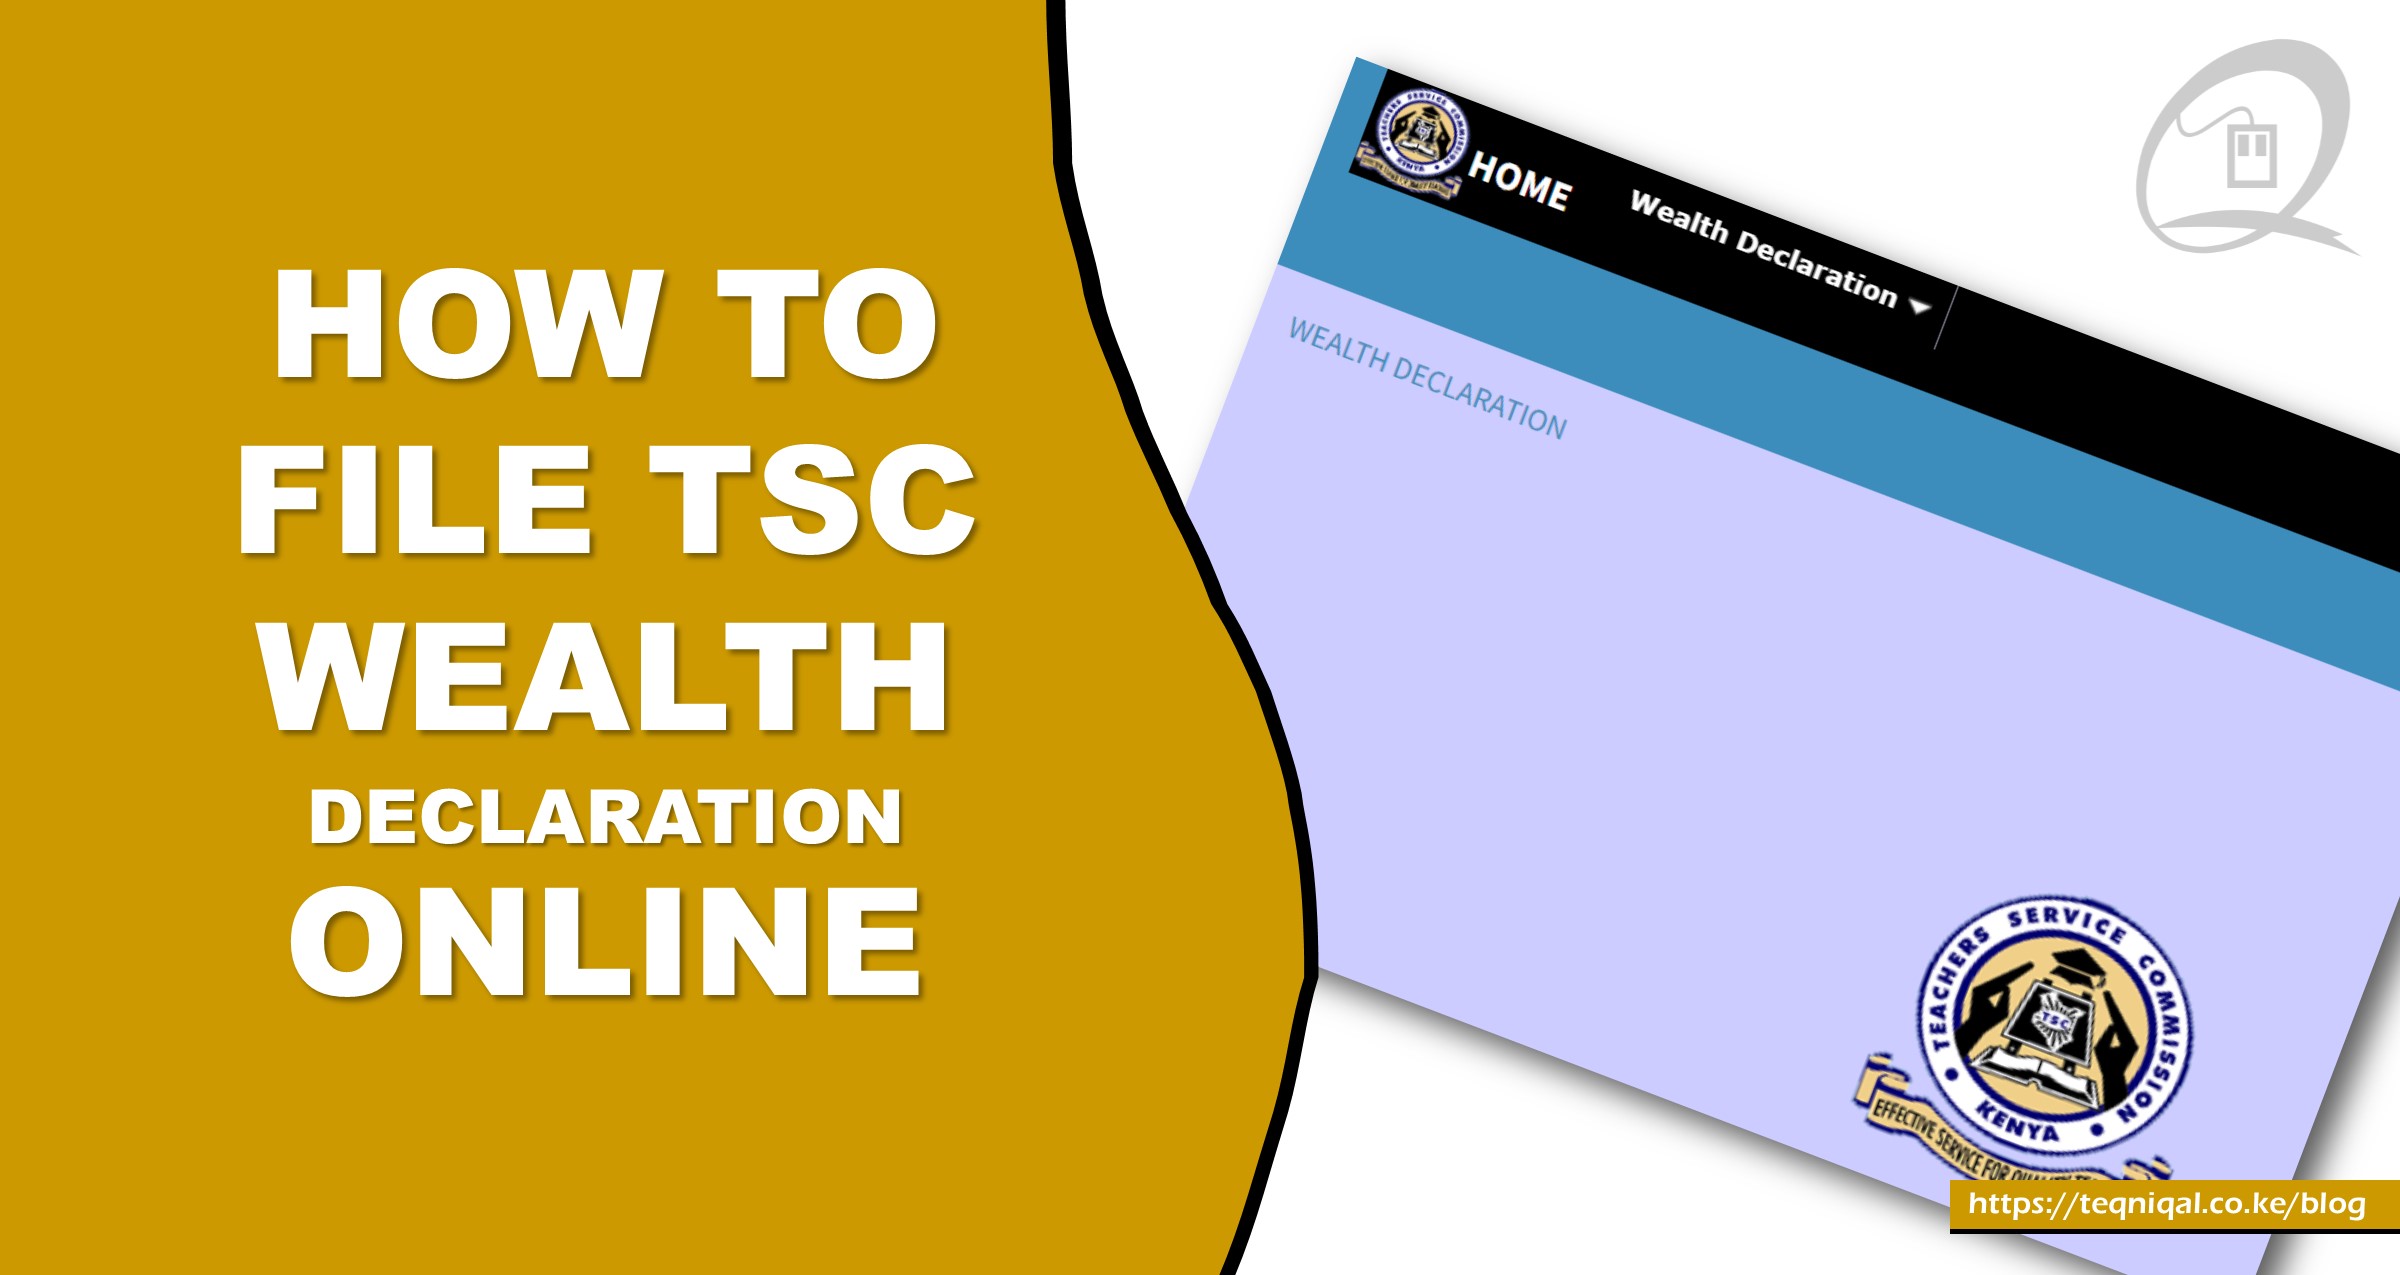 How to File TSC Wealth Declaration Online